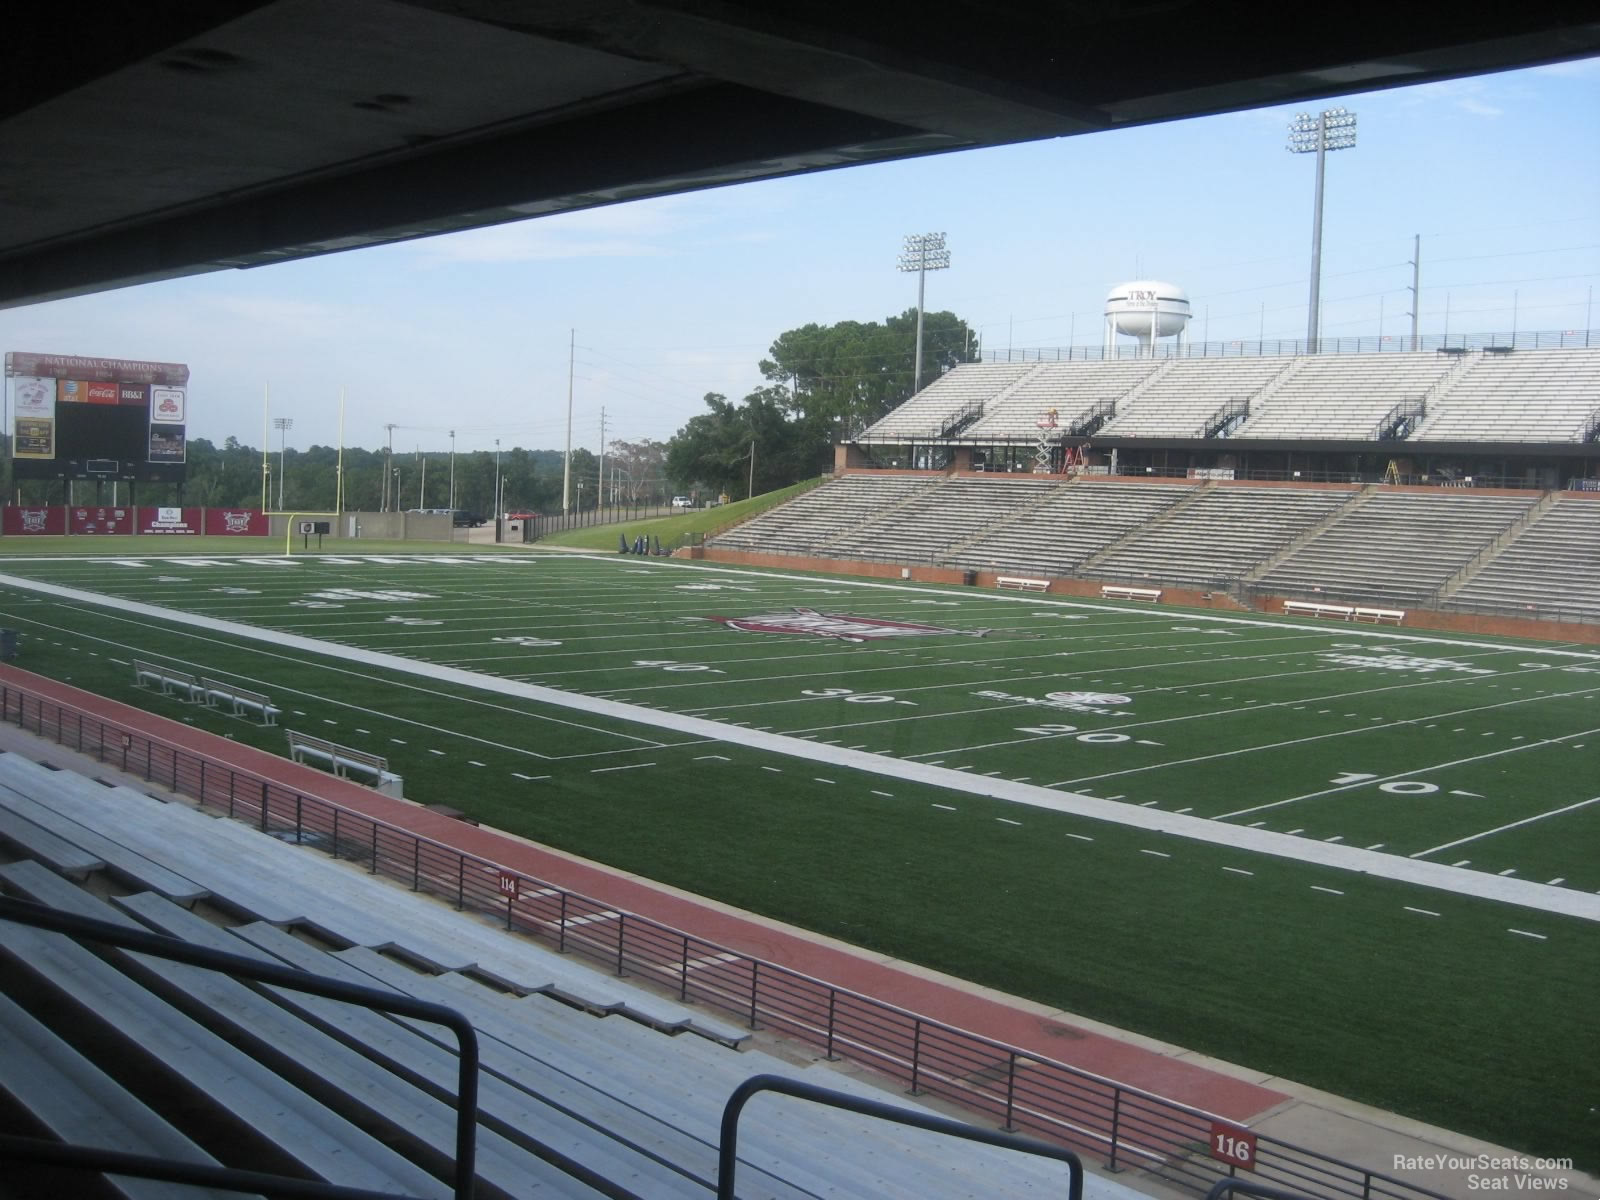 section 118, row 15 seat view  - troy memorial stadium